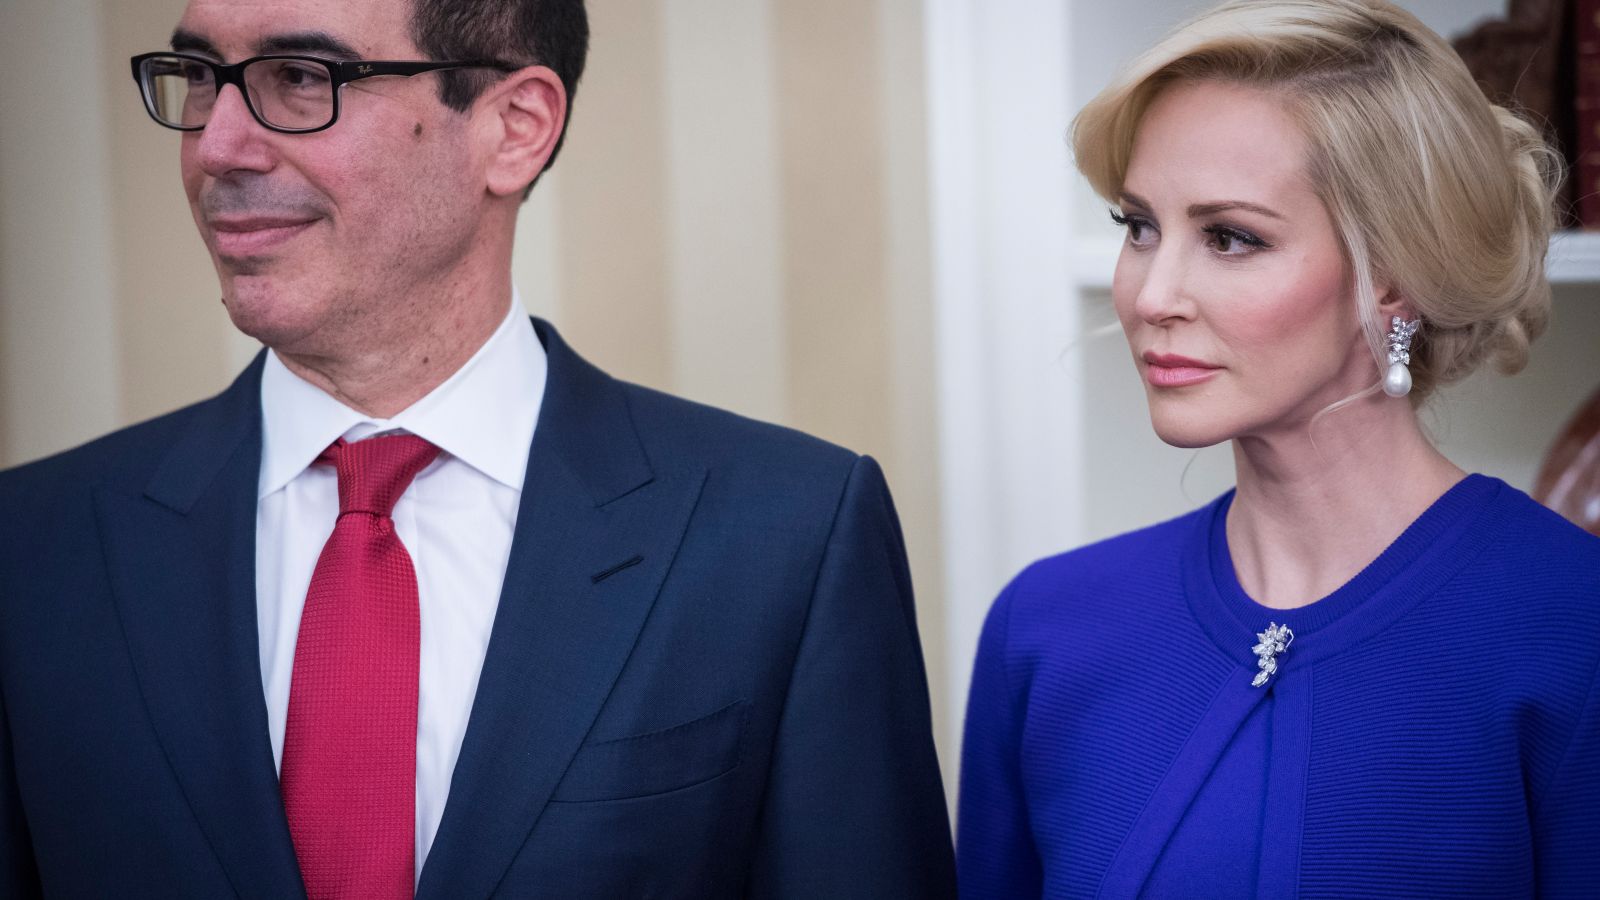 Louise Linton Deigns To Apologize For Offending Mon Folk With